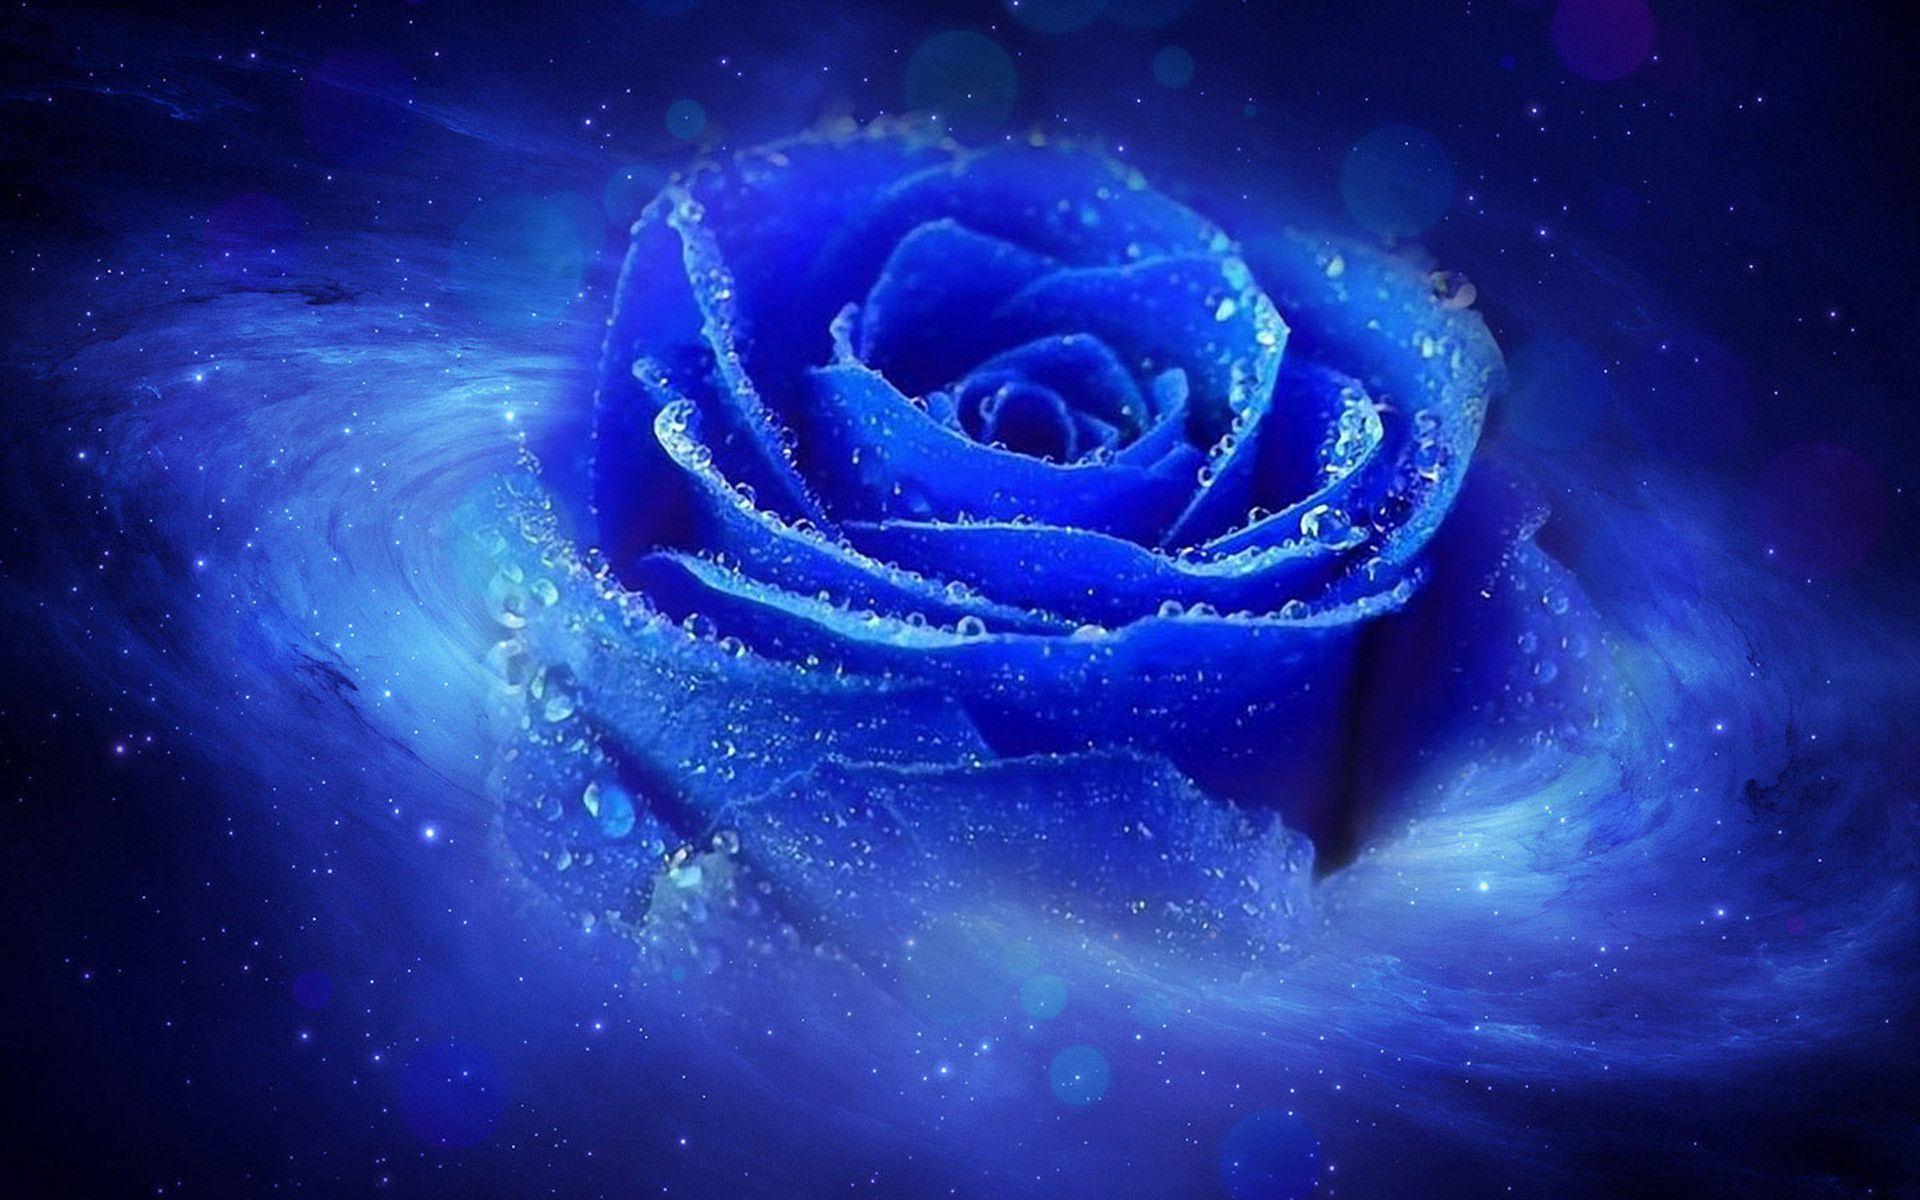 Rose Galaxy Wallpapers Top Free Rose Galaxy Backgrounds